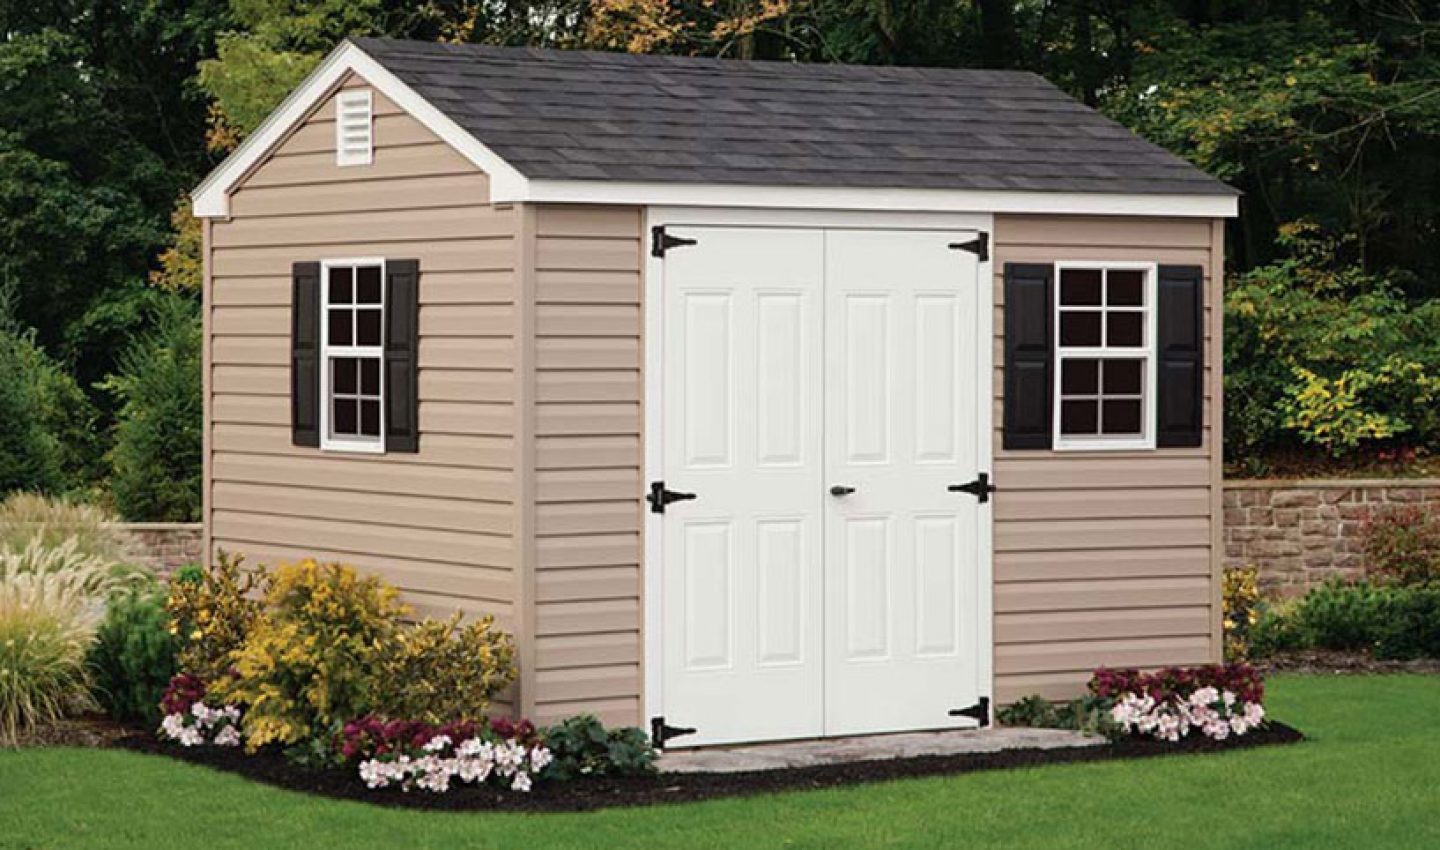 Most Popular Shed Styles: Which Do You Like Best?